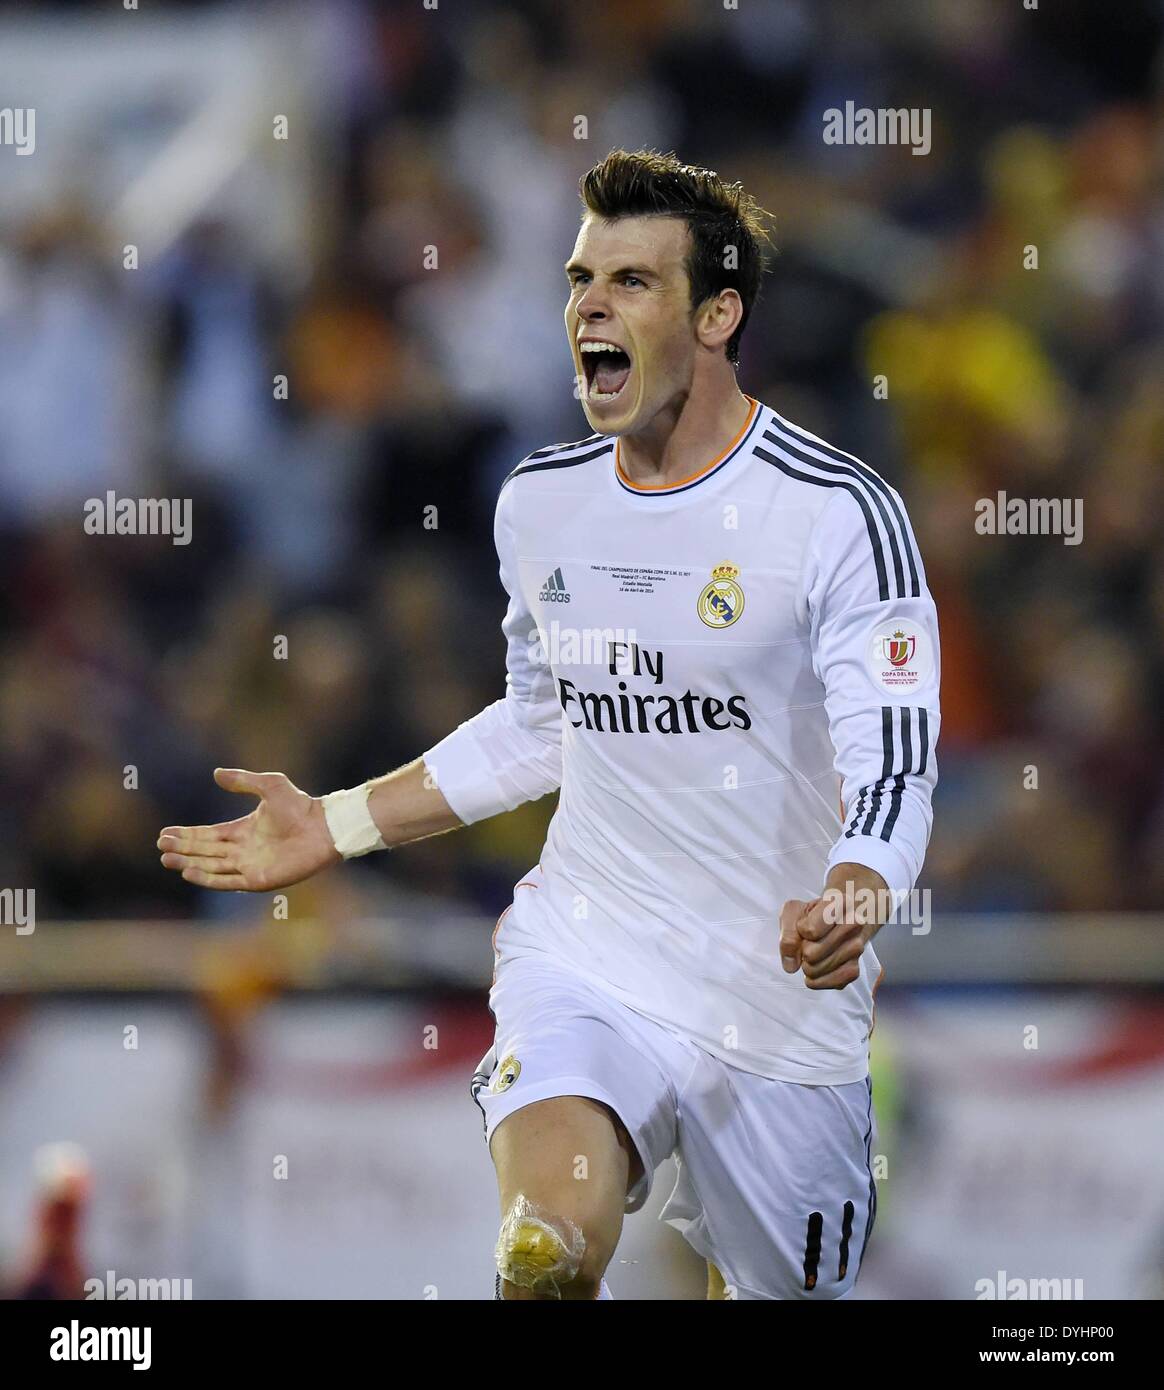 Mestalla, Valencia, Spain. 16th Apr, 2014. Copa Del Rey Cup final. Barcelona versus Real Madrid. Celebrations for the goal making it 1-2 from scorer Gareth Bale © Action Plus Sports/Alamy Live News Stock Photo